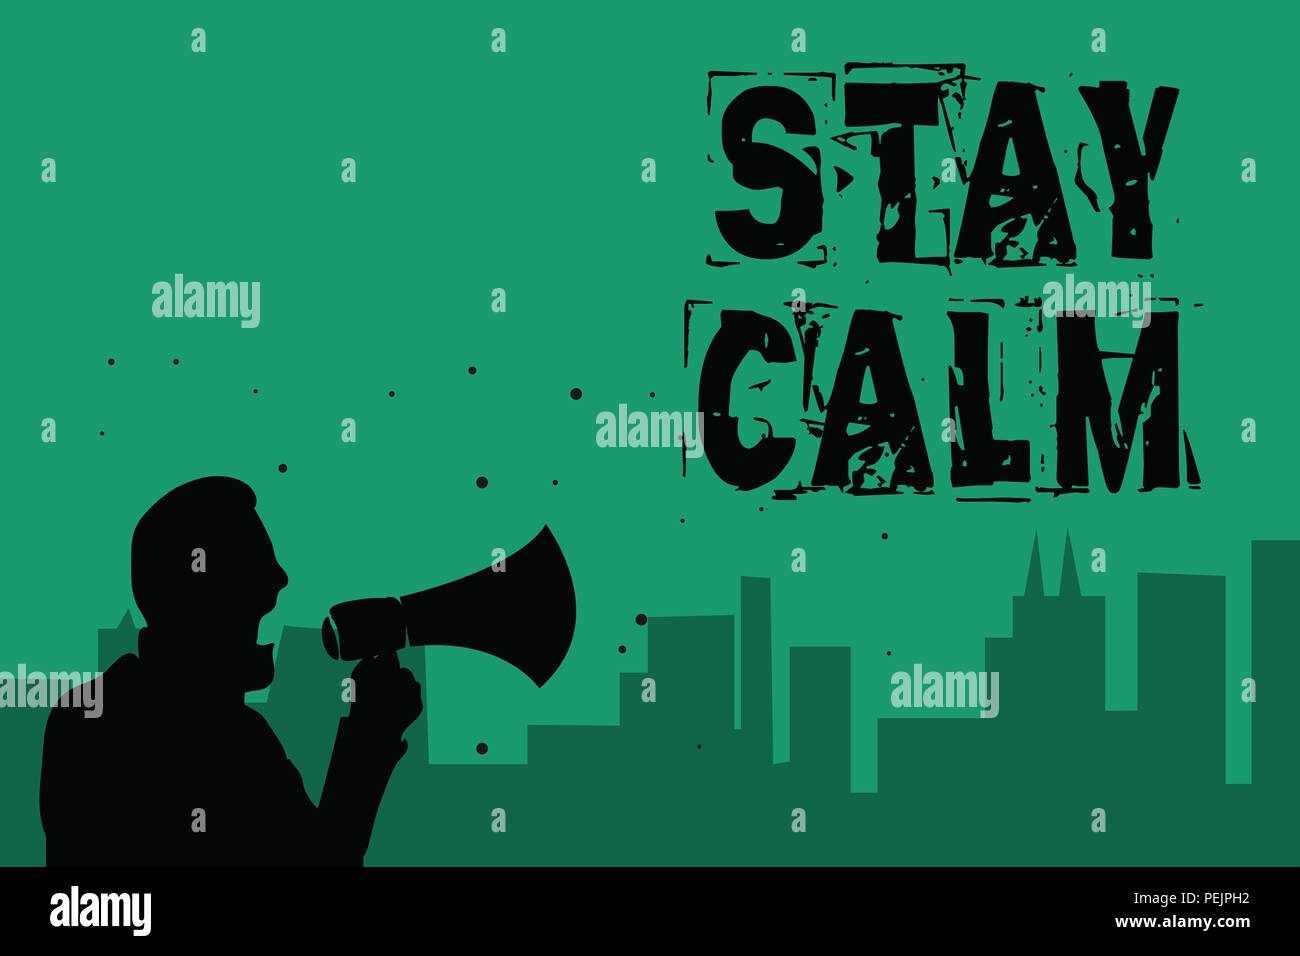 Word writing text Stay Calm. Business concept for Maintain in a state of motion smoothly even under pressure Man holding megaphone speaking politician Stock Photo